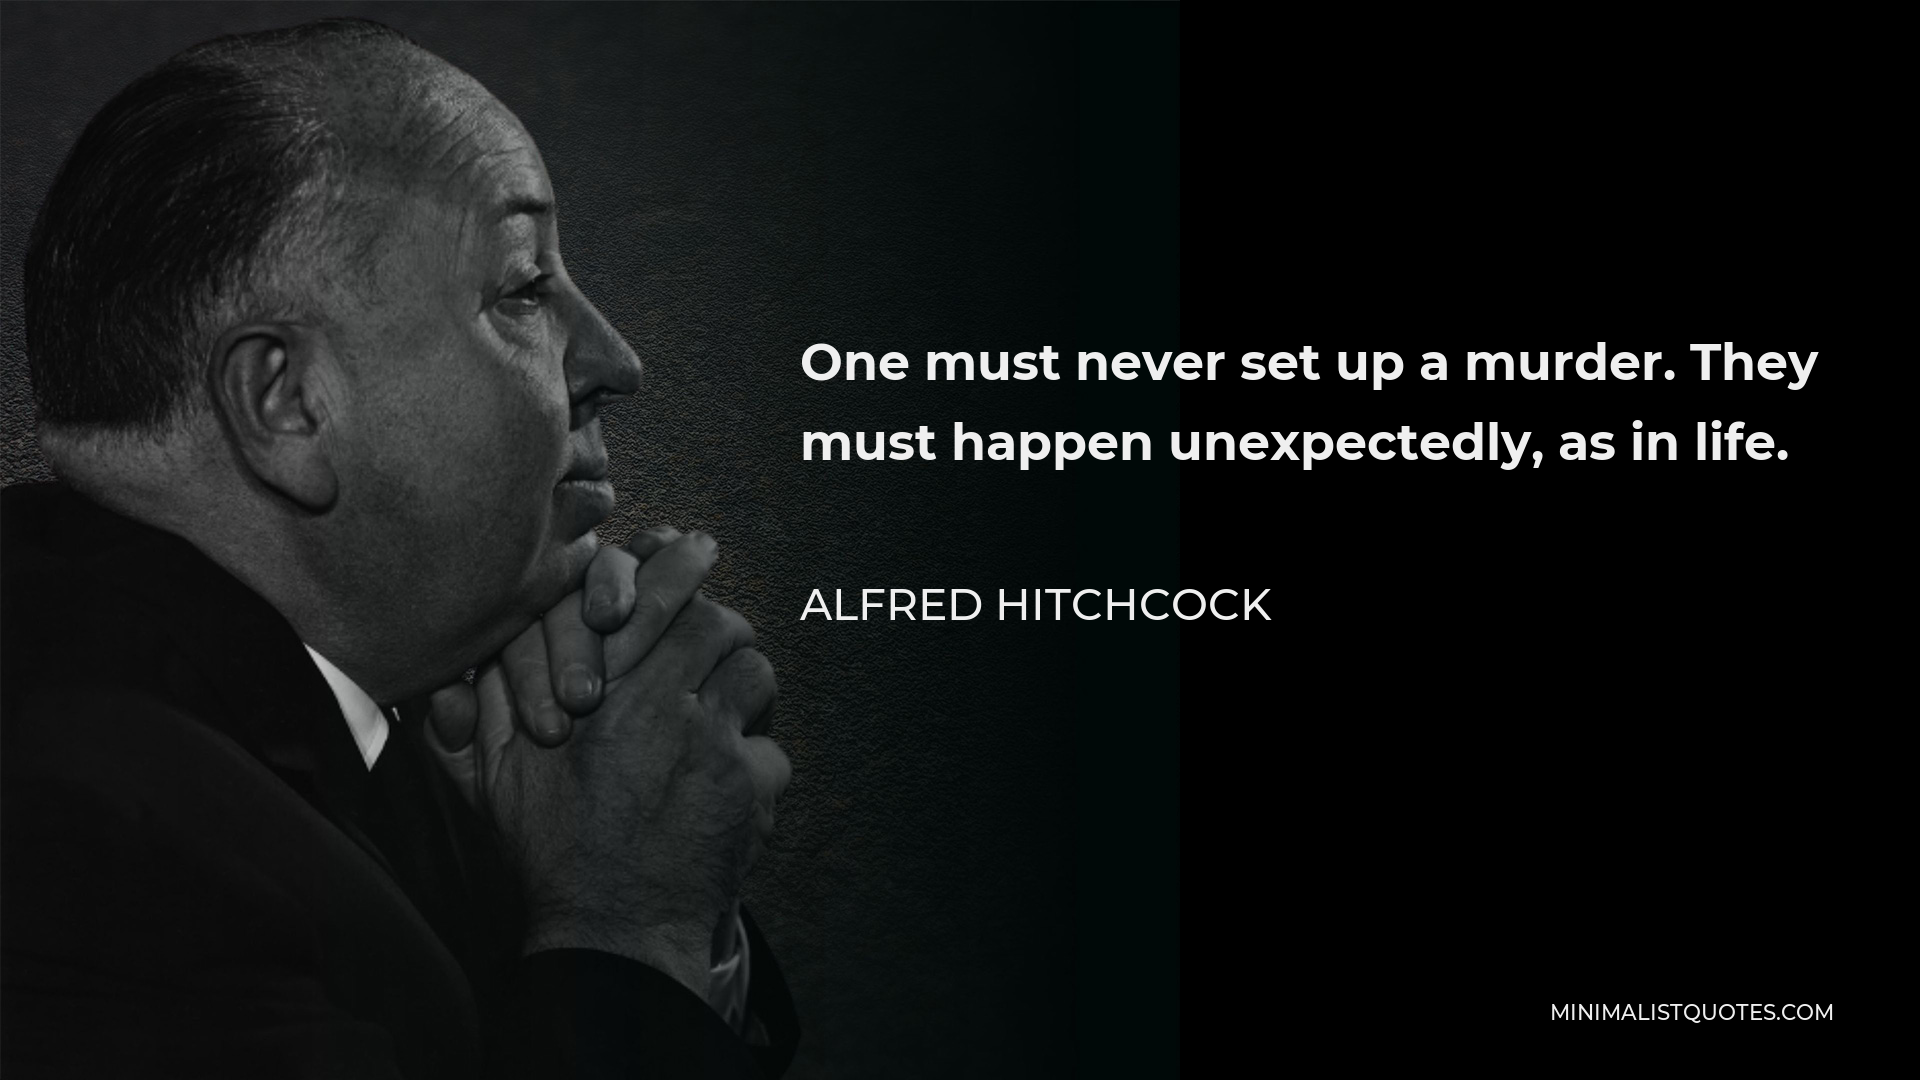 Alfred Hitchcock Quote - One must never set up a murder. They must happen unexpectedly, as in life.